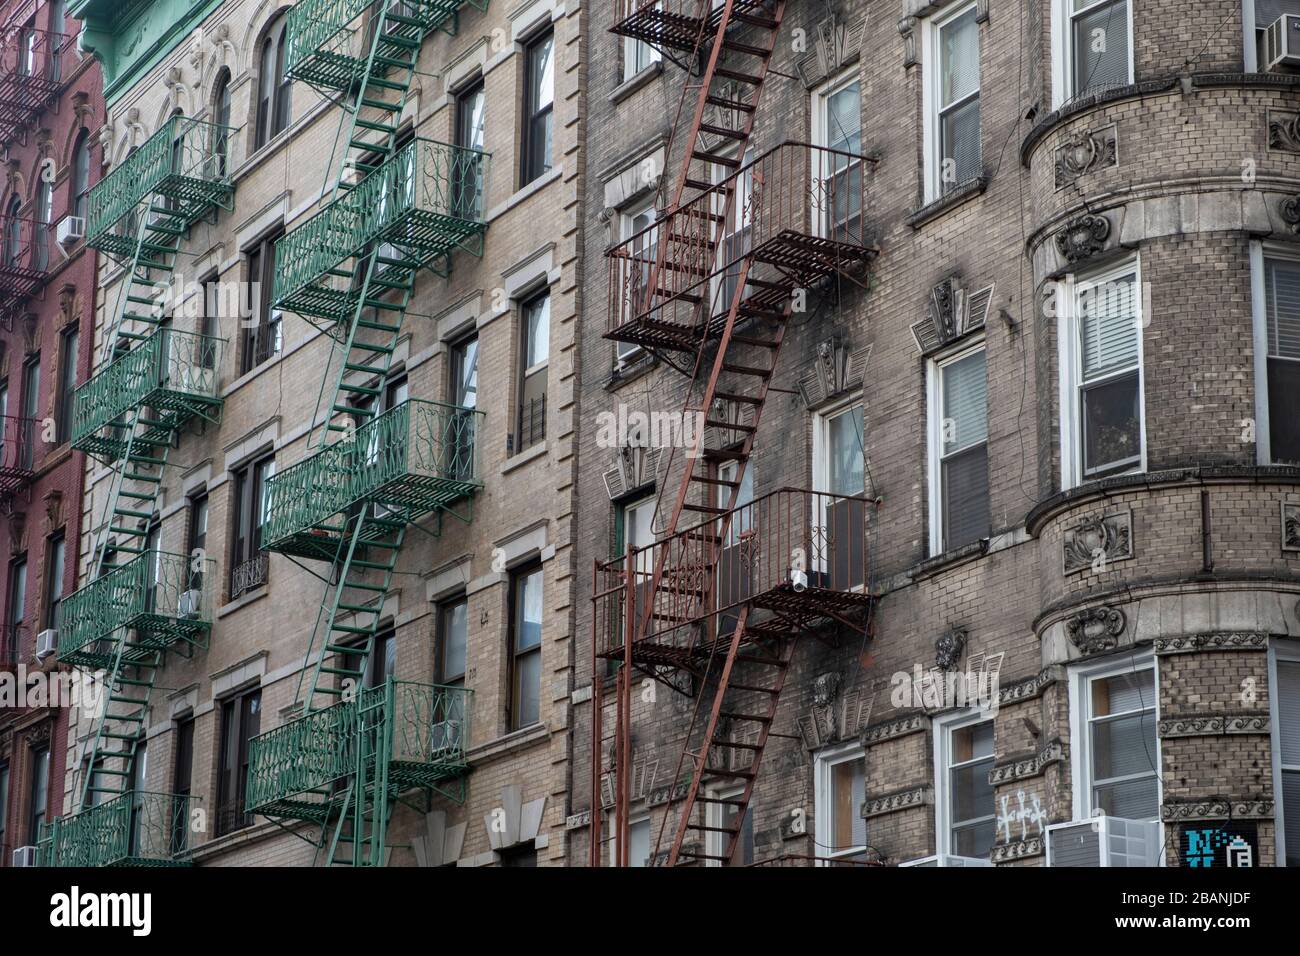 Fire escapes in New York, USA, US Stock Photo